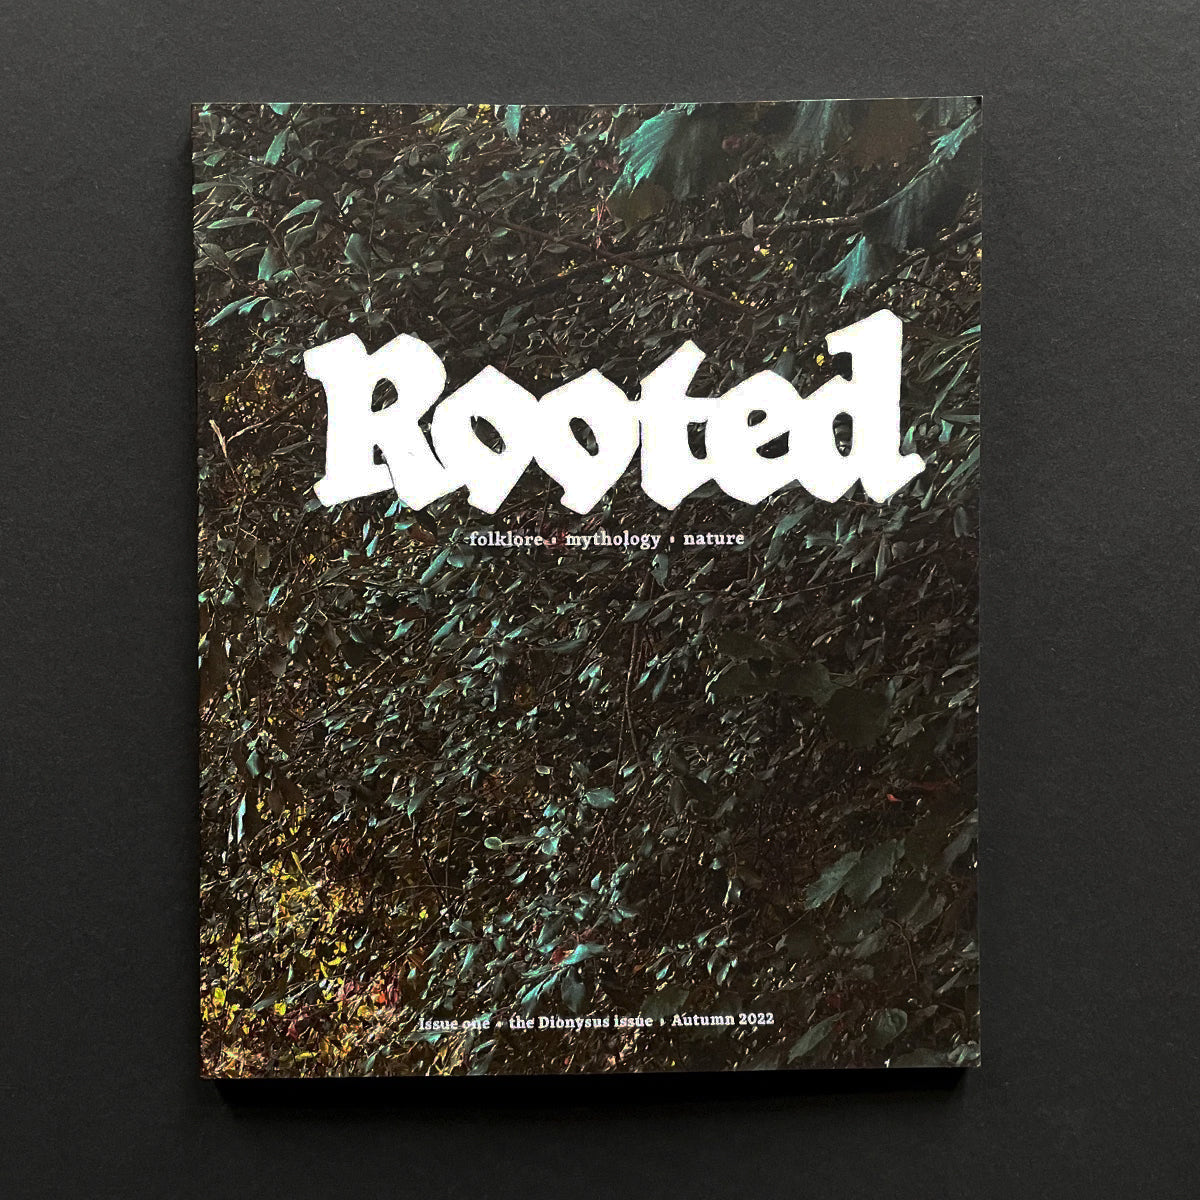 Rooted Magazine Complete Collection